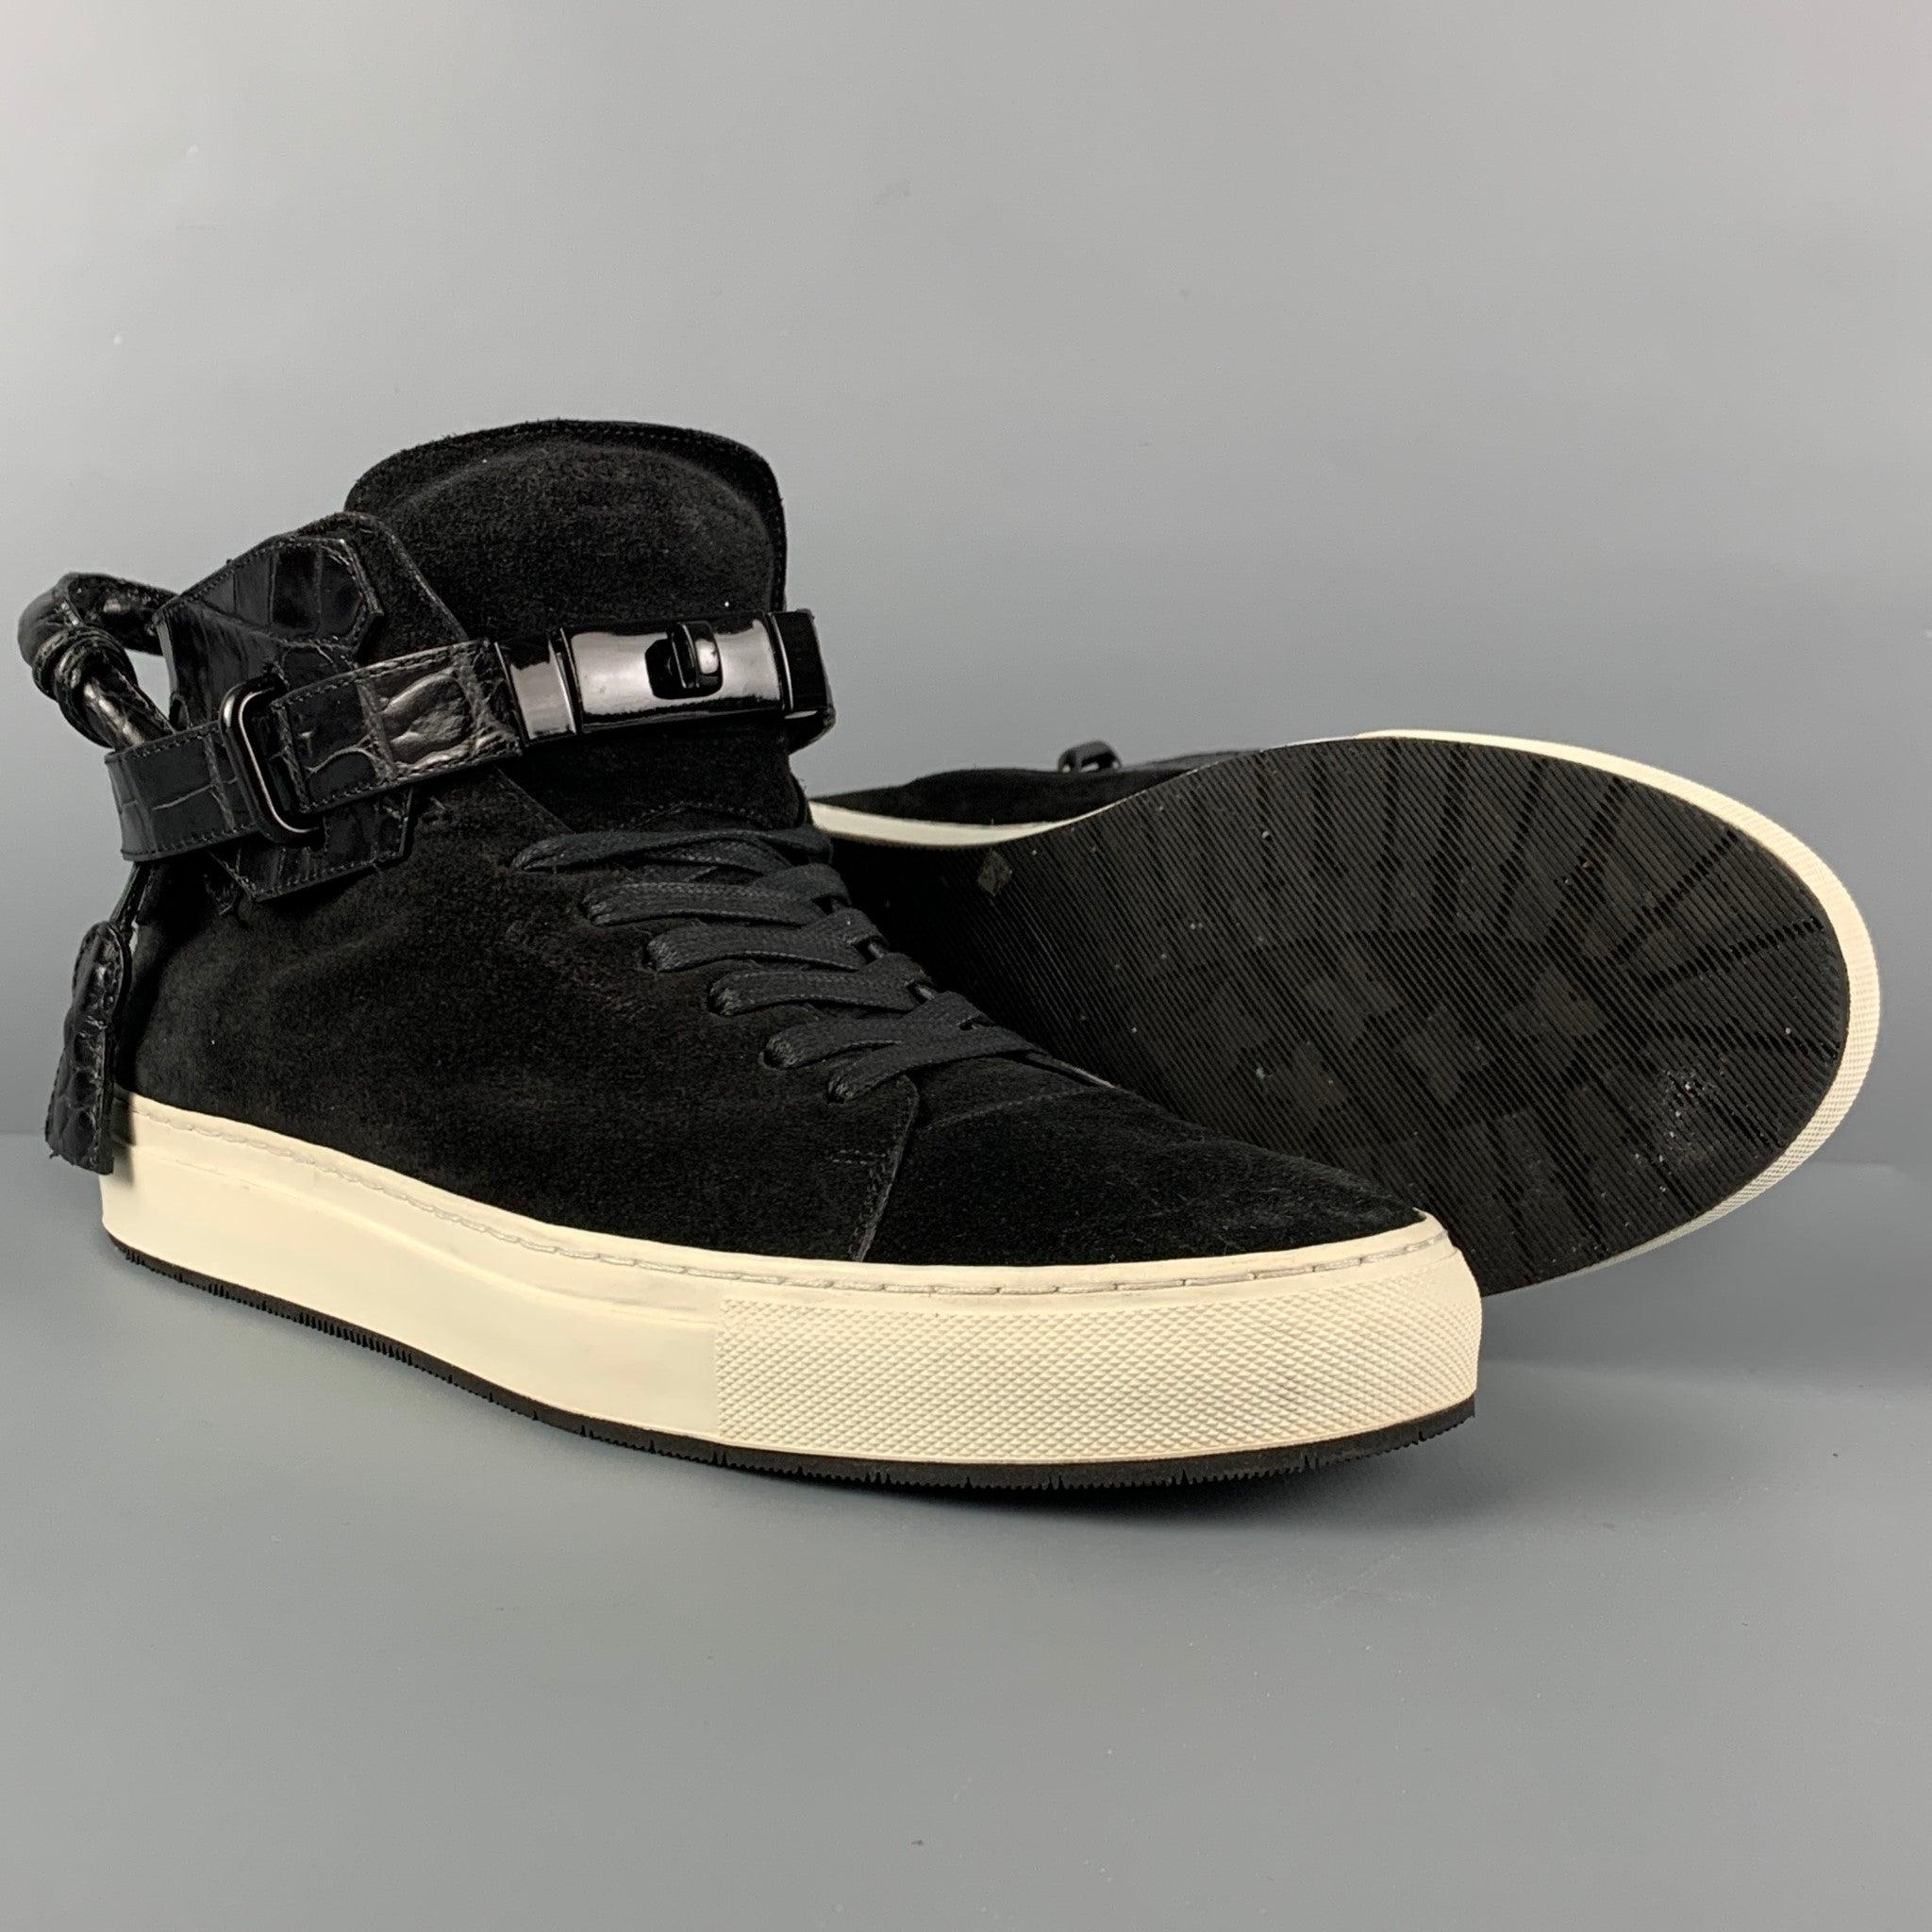 BUSCEMI Size 11 Black Embossed Suede 100MM High Top Sneakers In Good Condition For Sale In San Francisco, CA